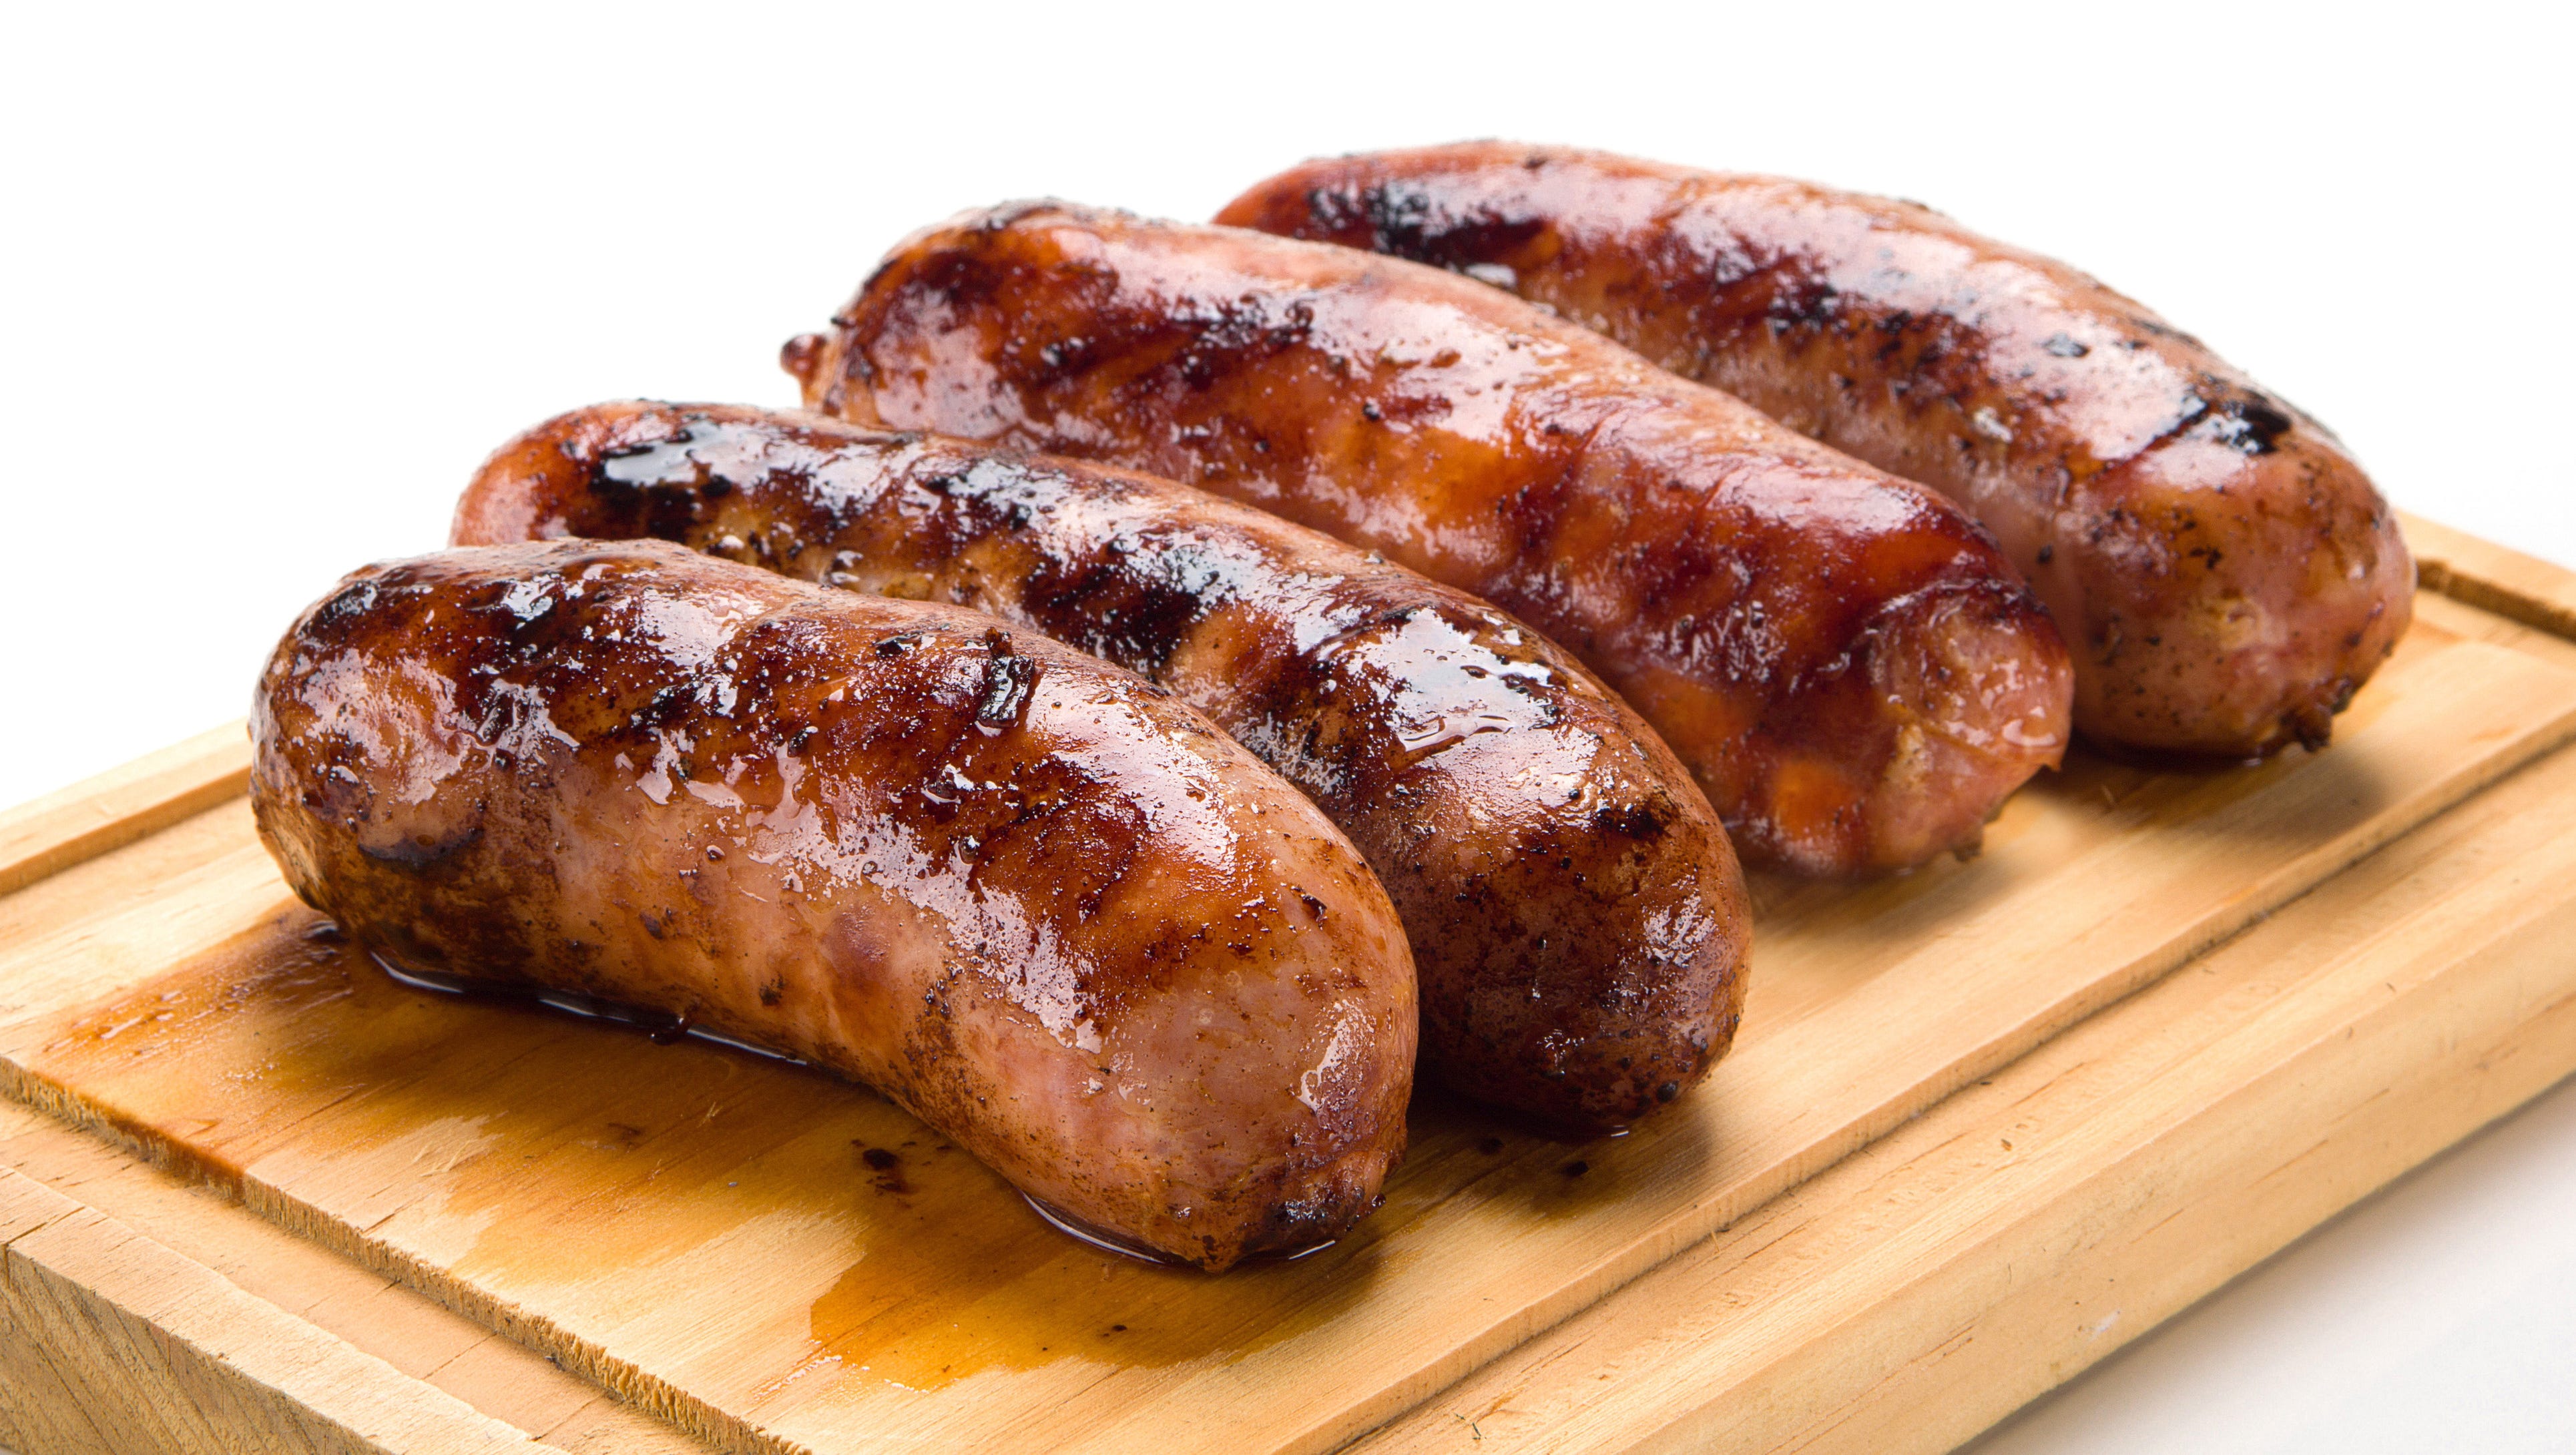 Let's Talk Food: Sausage is best of the wurst